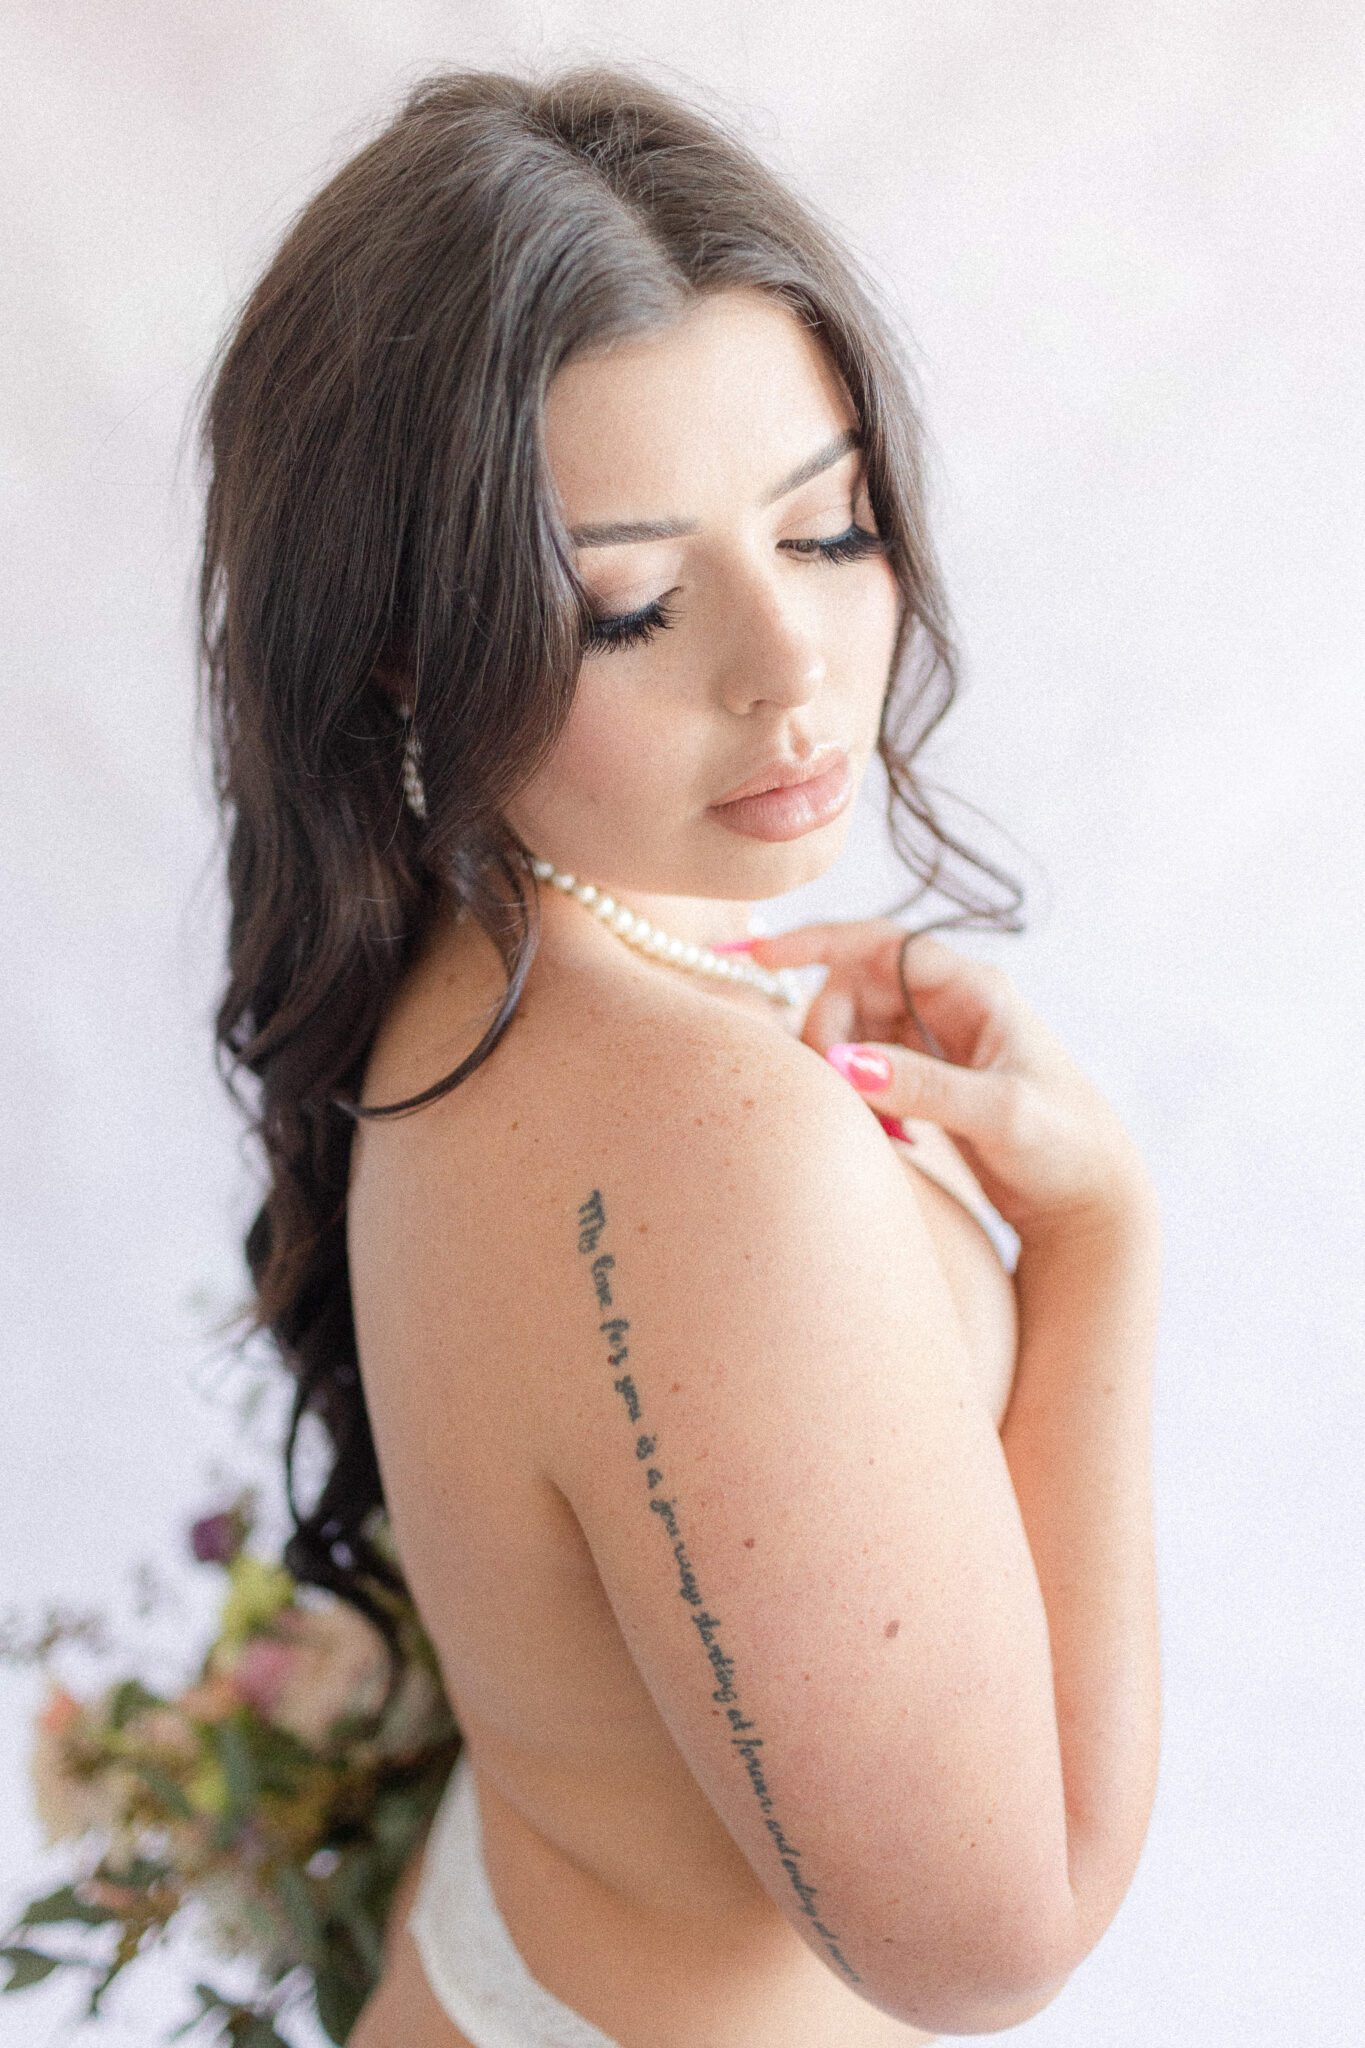 Bride-to-be posing for boudoir portrait wearing vintage pearls, holding gorgeous spring inspired florals. 